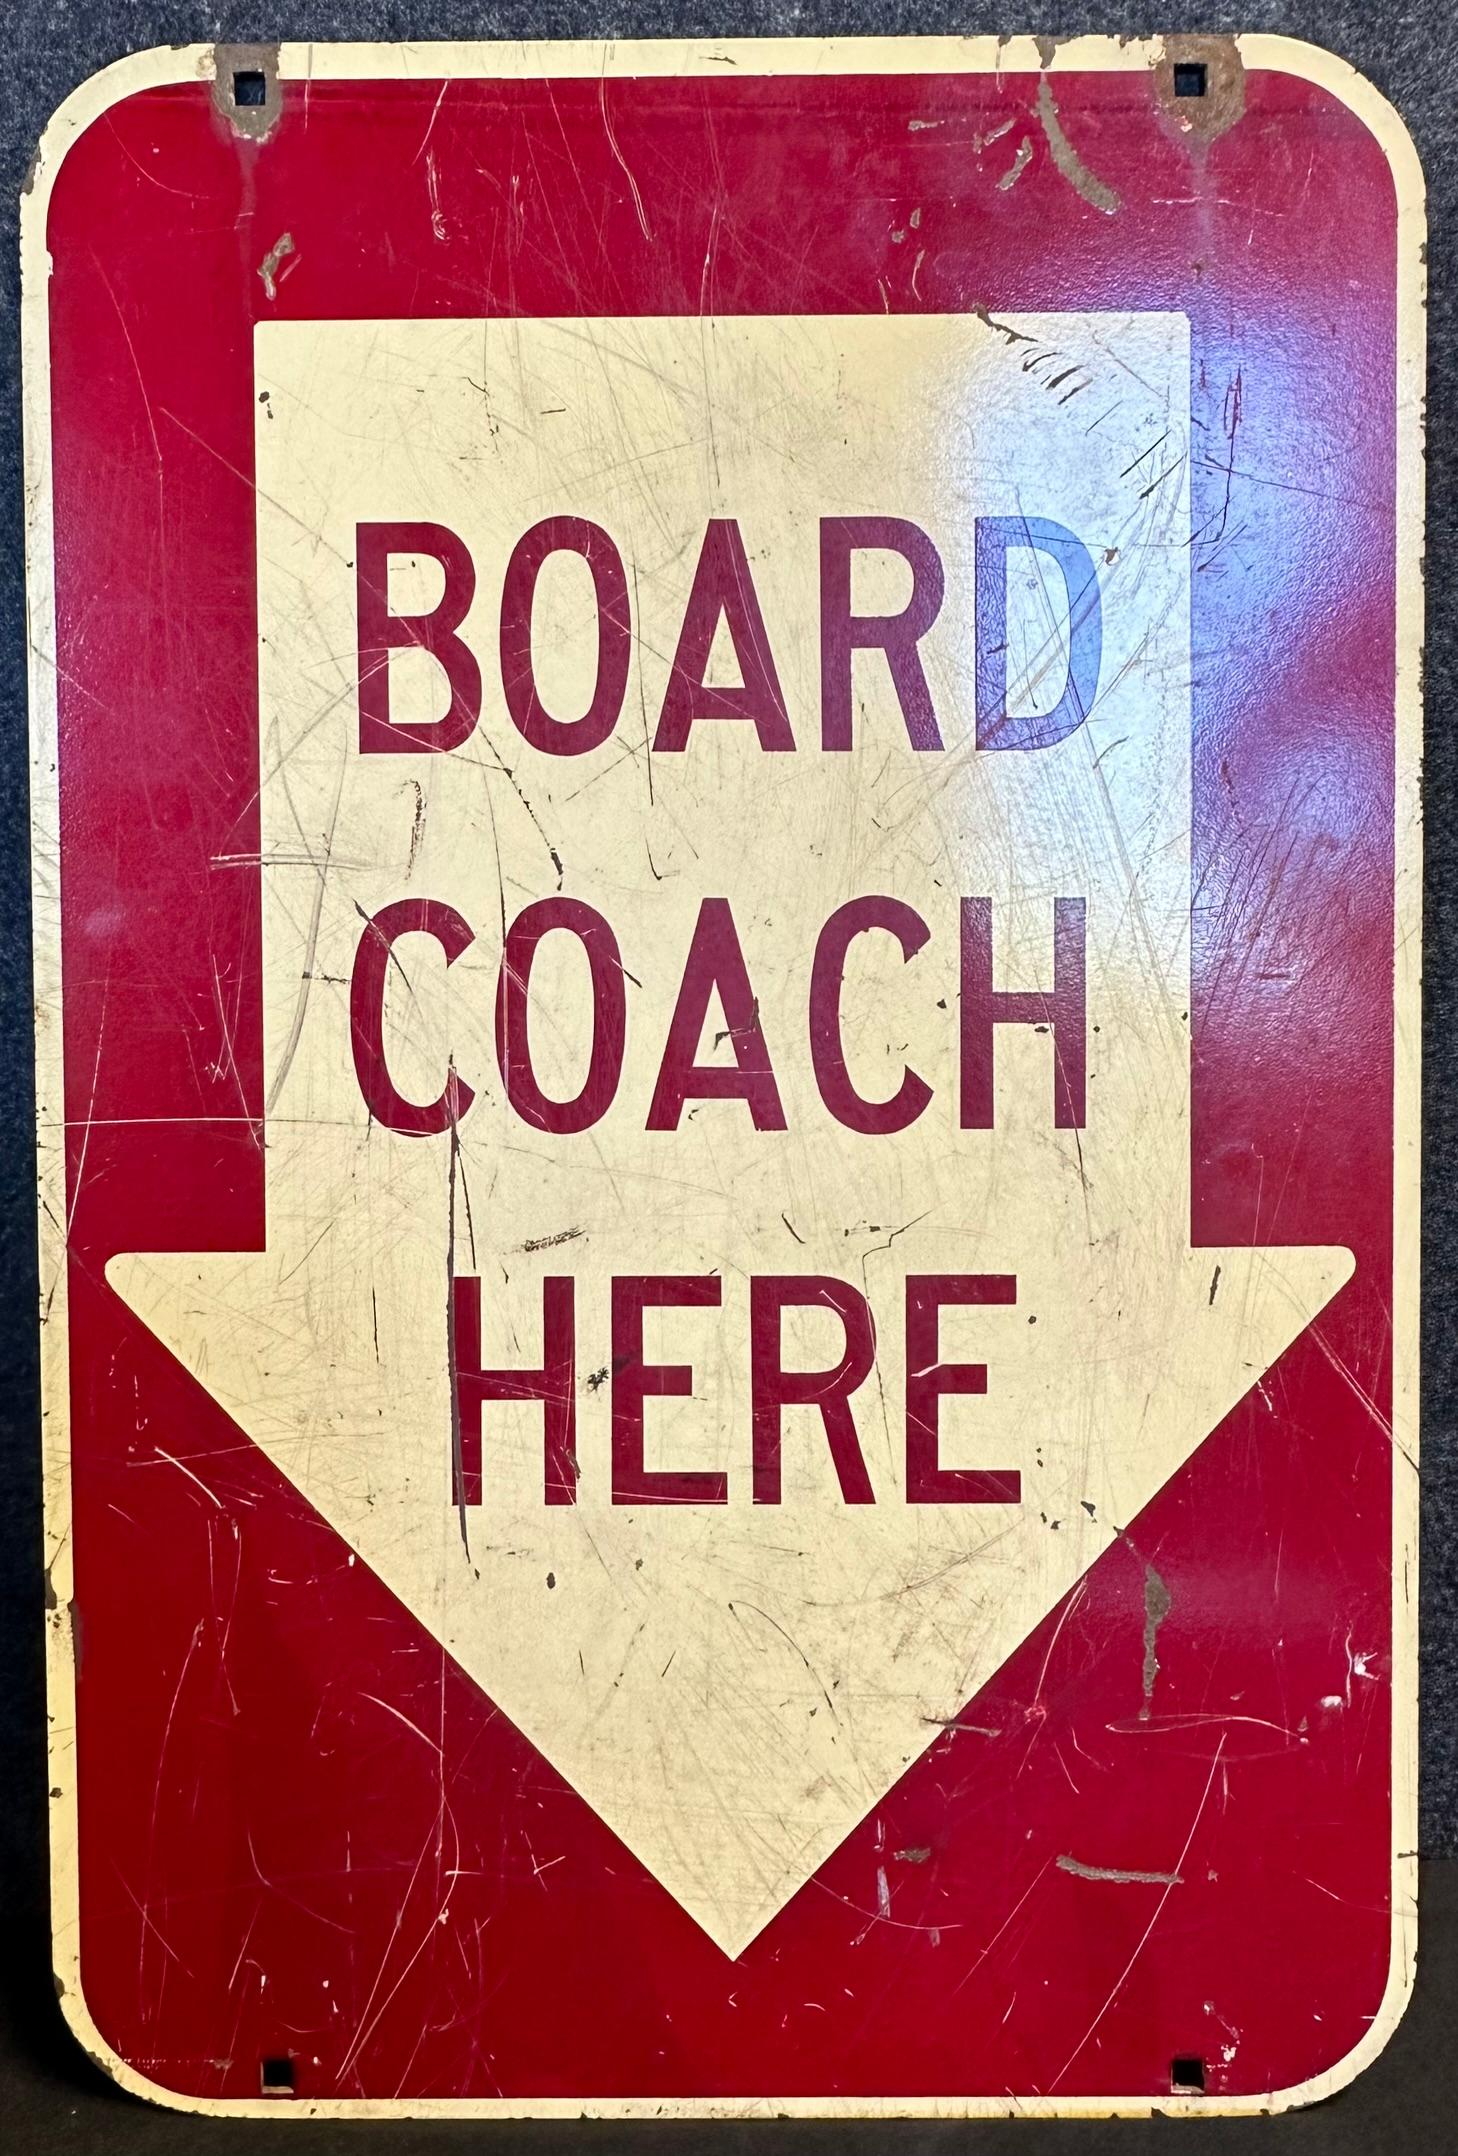 1930s Board Coach Here Double Sided Heavy Painted Metal Sign